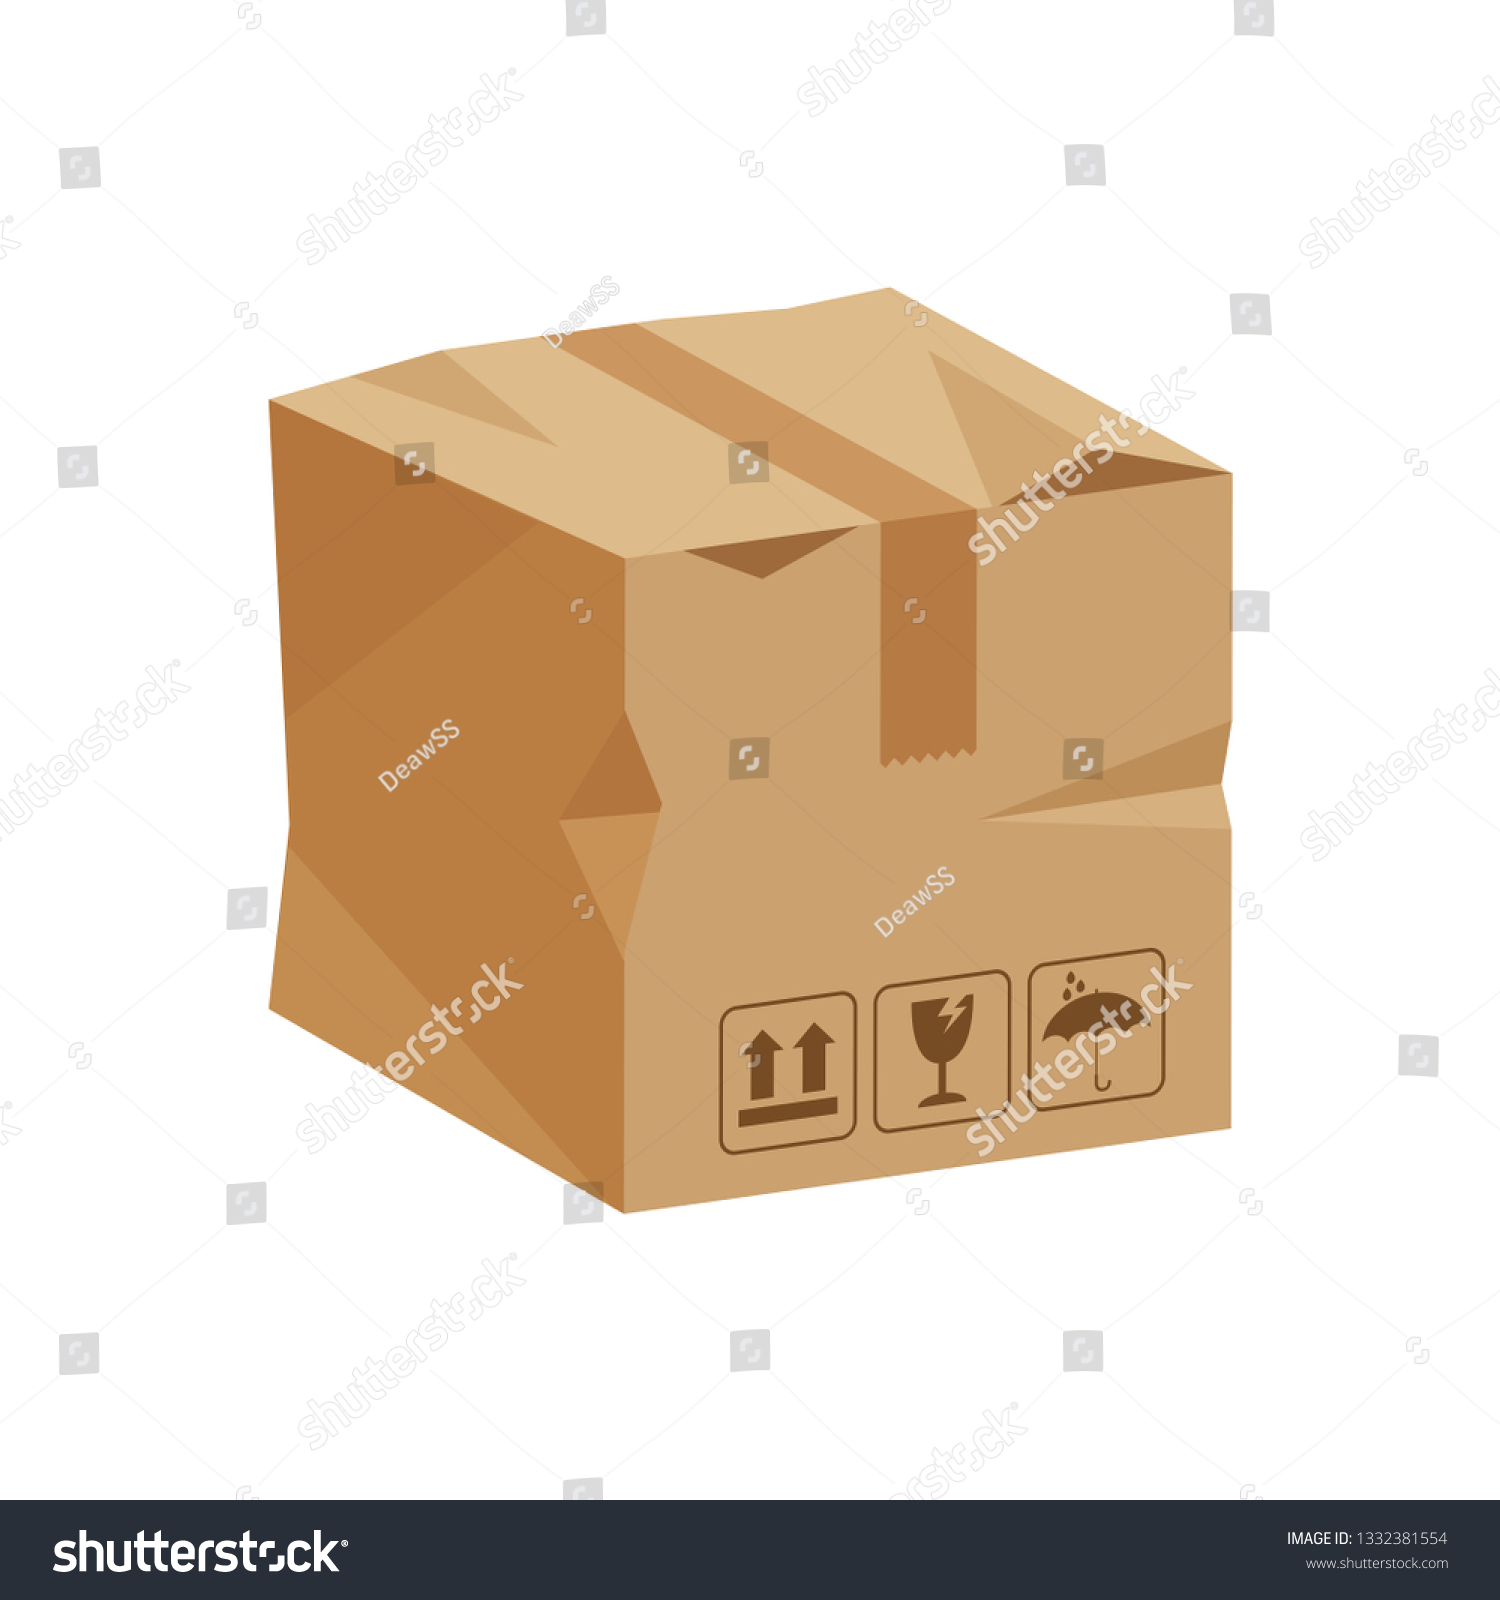 damaged crate boxes 3d, broken cardboard box brown, flat style cardboard parcel boxes, packaging cargo, isometric boxes brown, packaging box brown icon, symbol carton box isolated on white background #1332381554